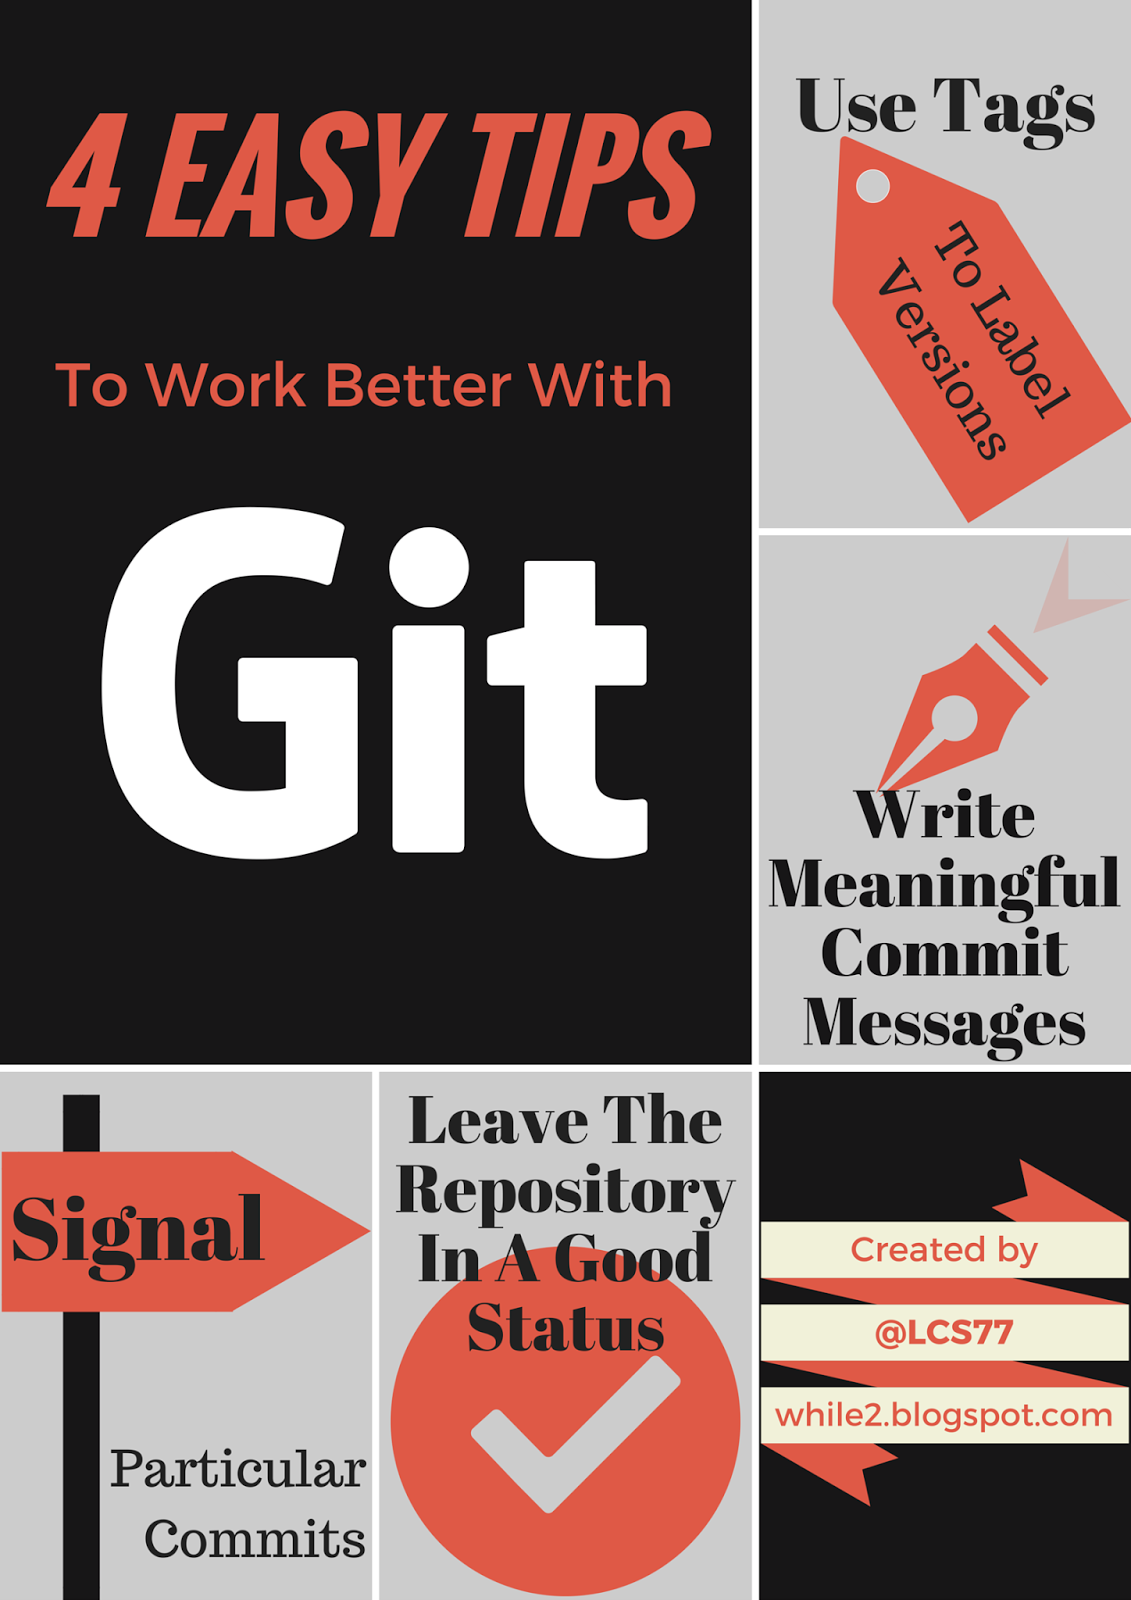 4 Easy Tips To Work Better With Git